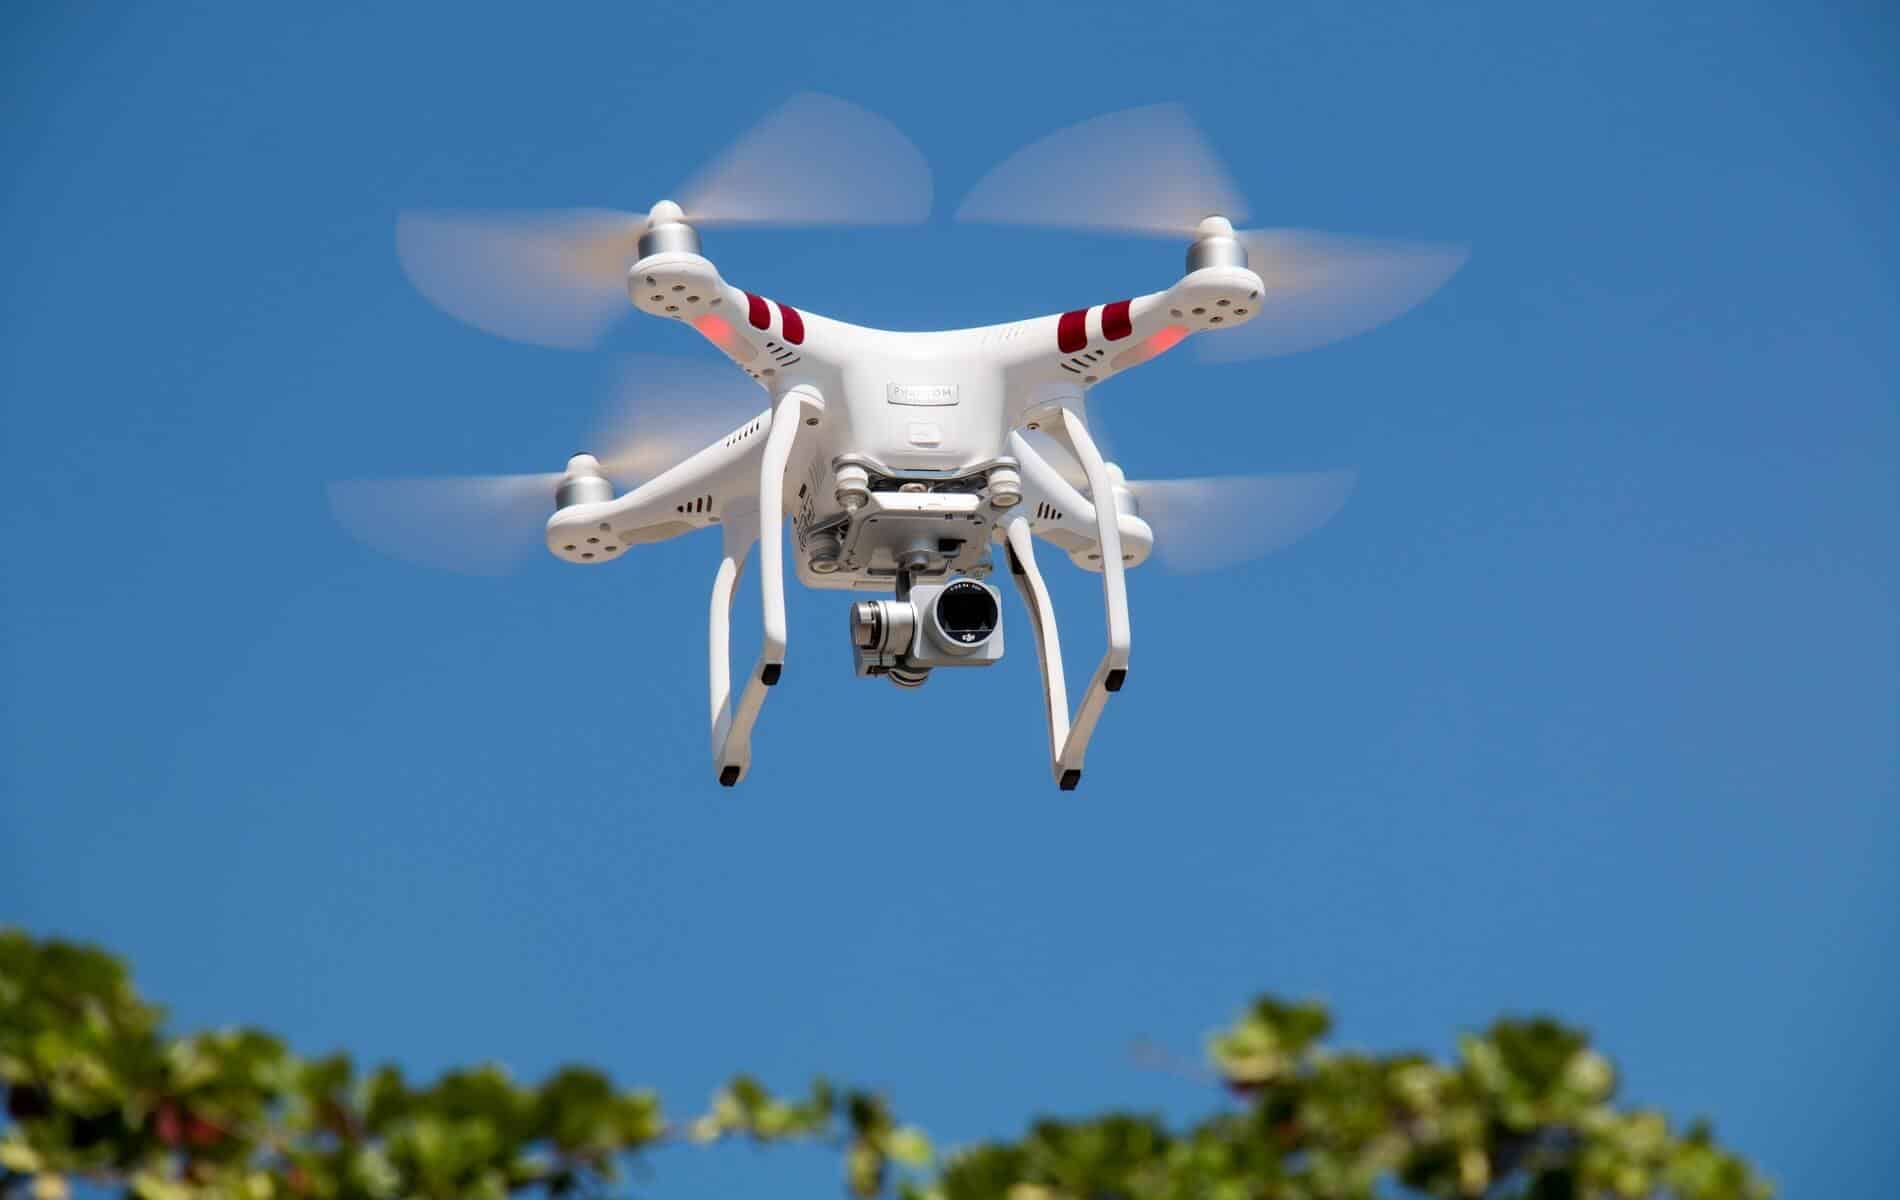 Protecting Your Privacy & Property - Example Case of Shooting Down Drones 92